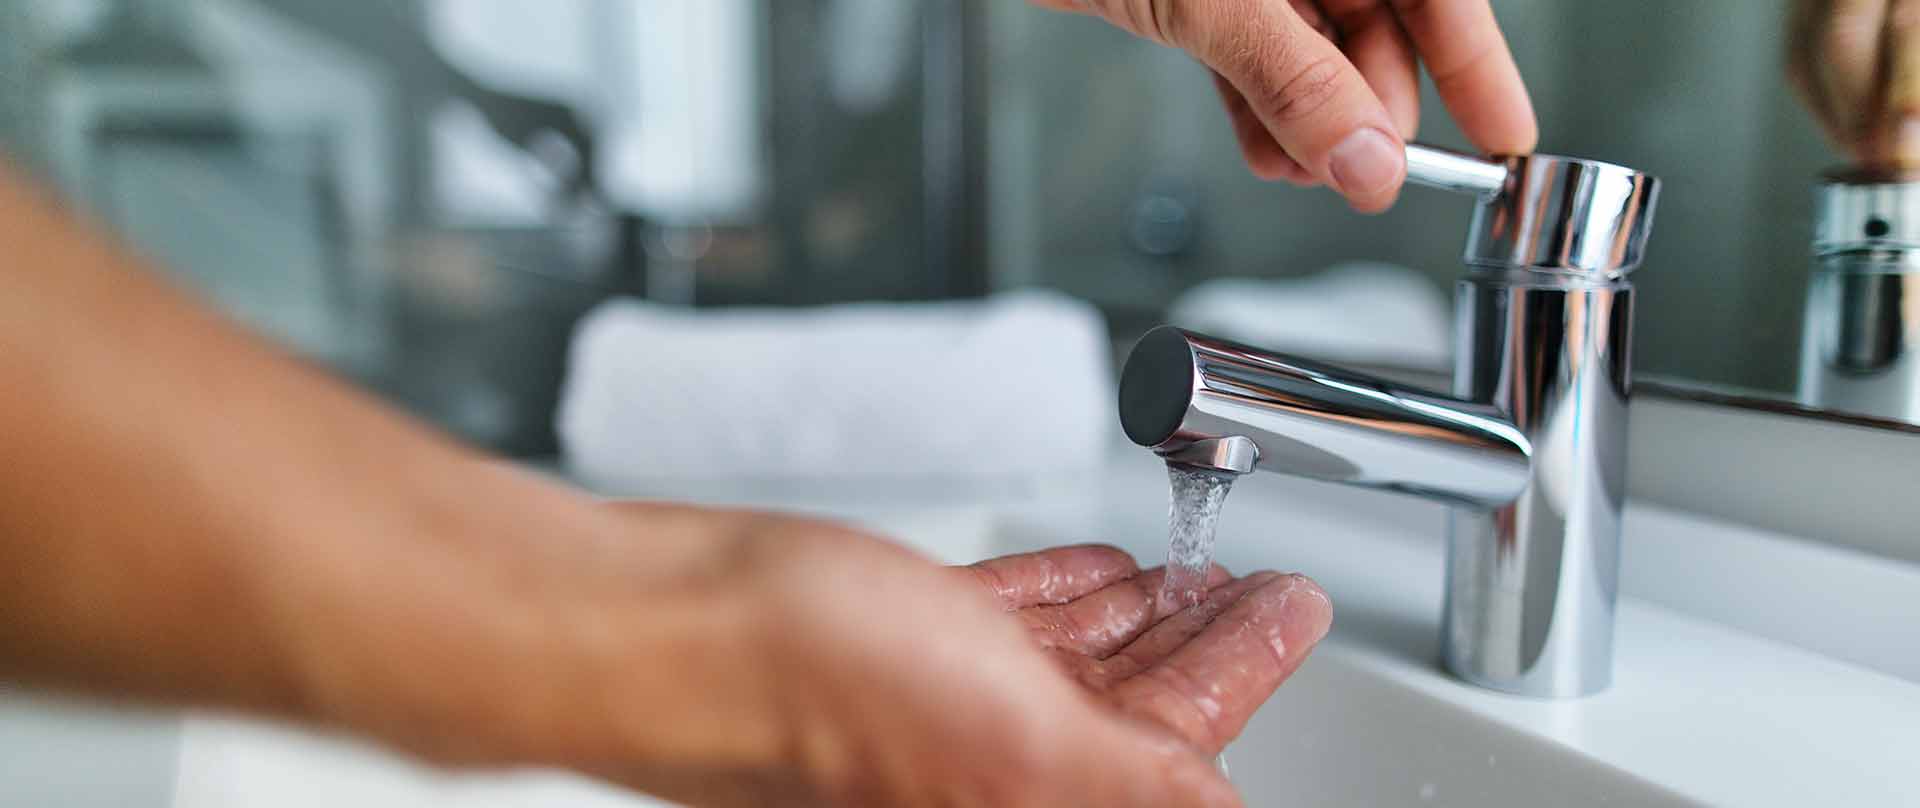 A faucet running on hands in Lakeland, FL.